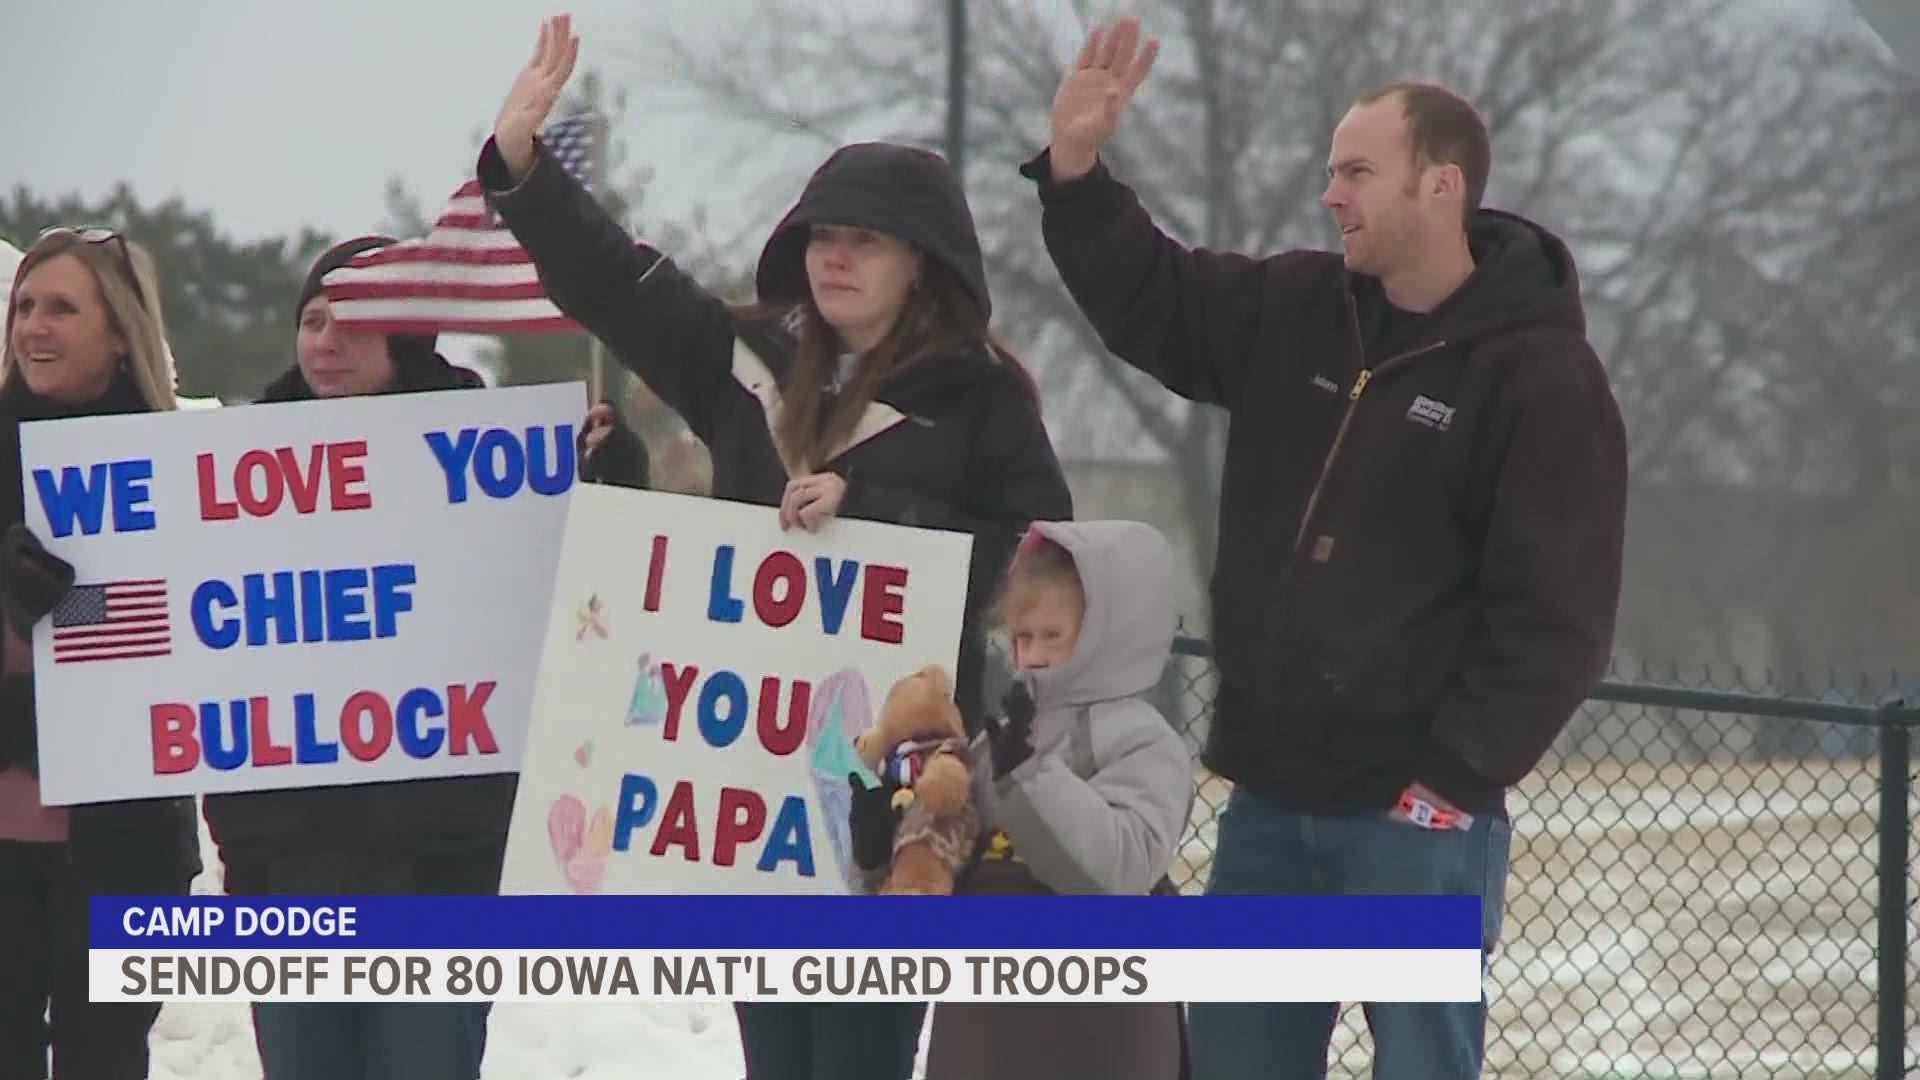 Welcome home and farewell ceremonies were held at Camp Dodge over the weekend, for members of the National Guard.